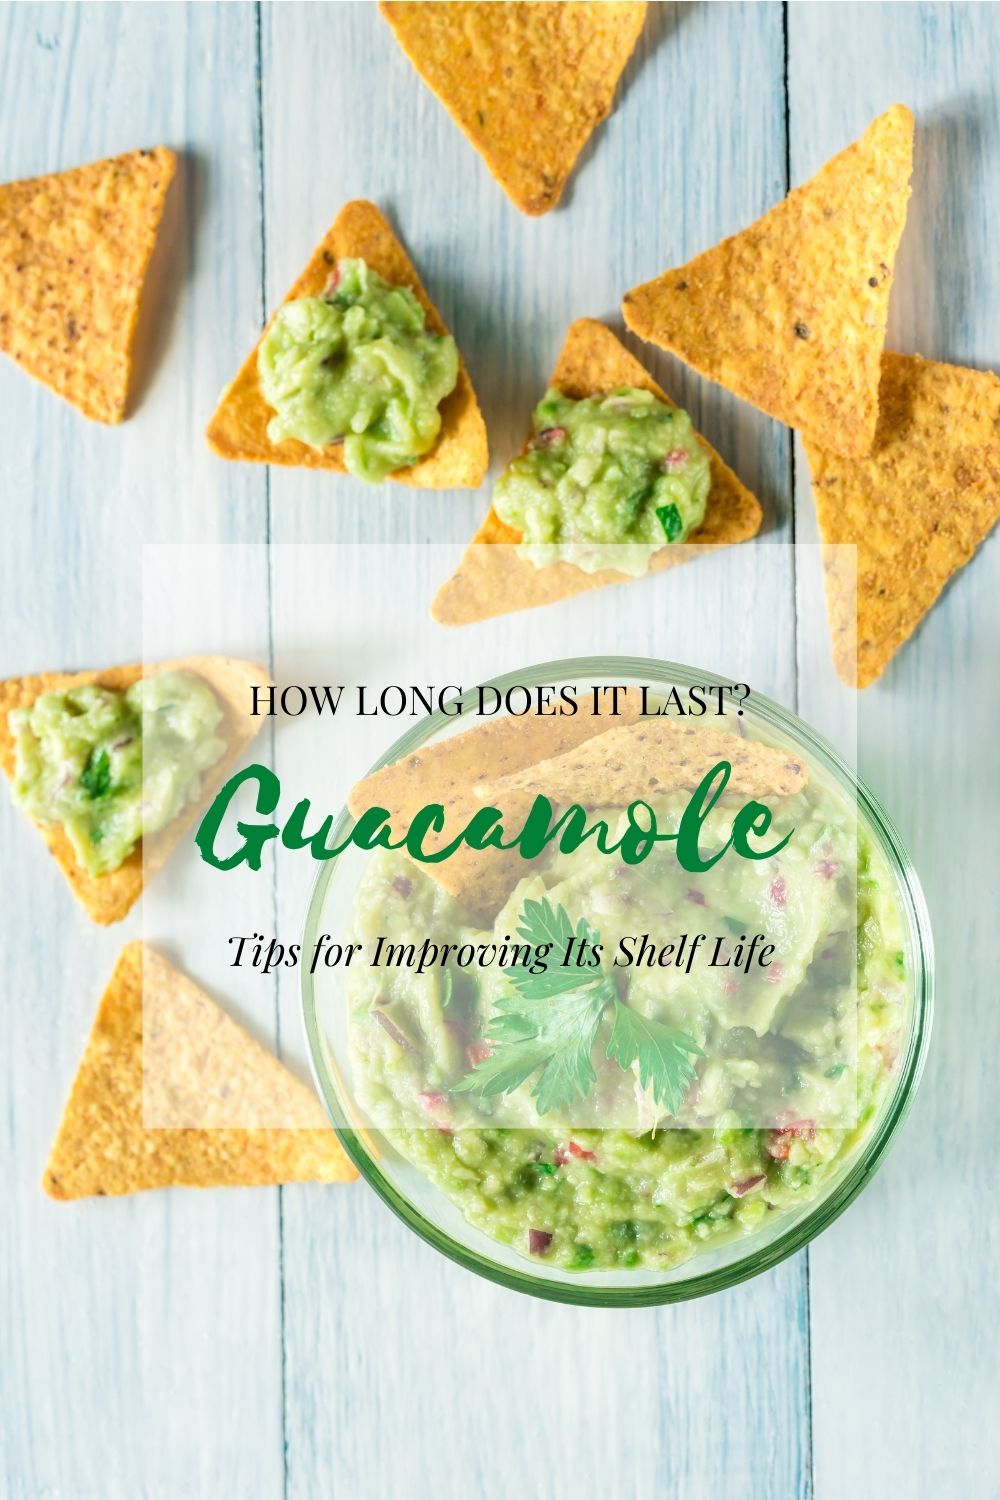 How Long Does Guacamole Last? Tips for Improving Its Shelf Life